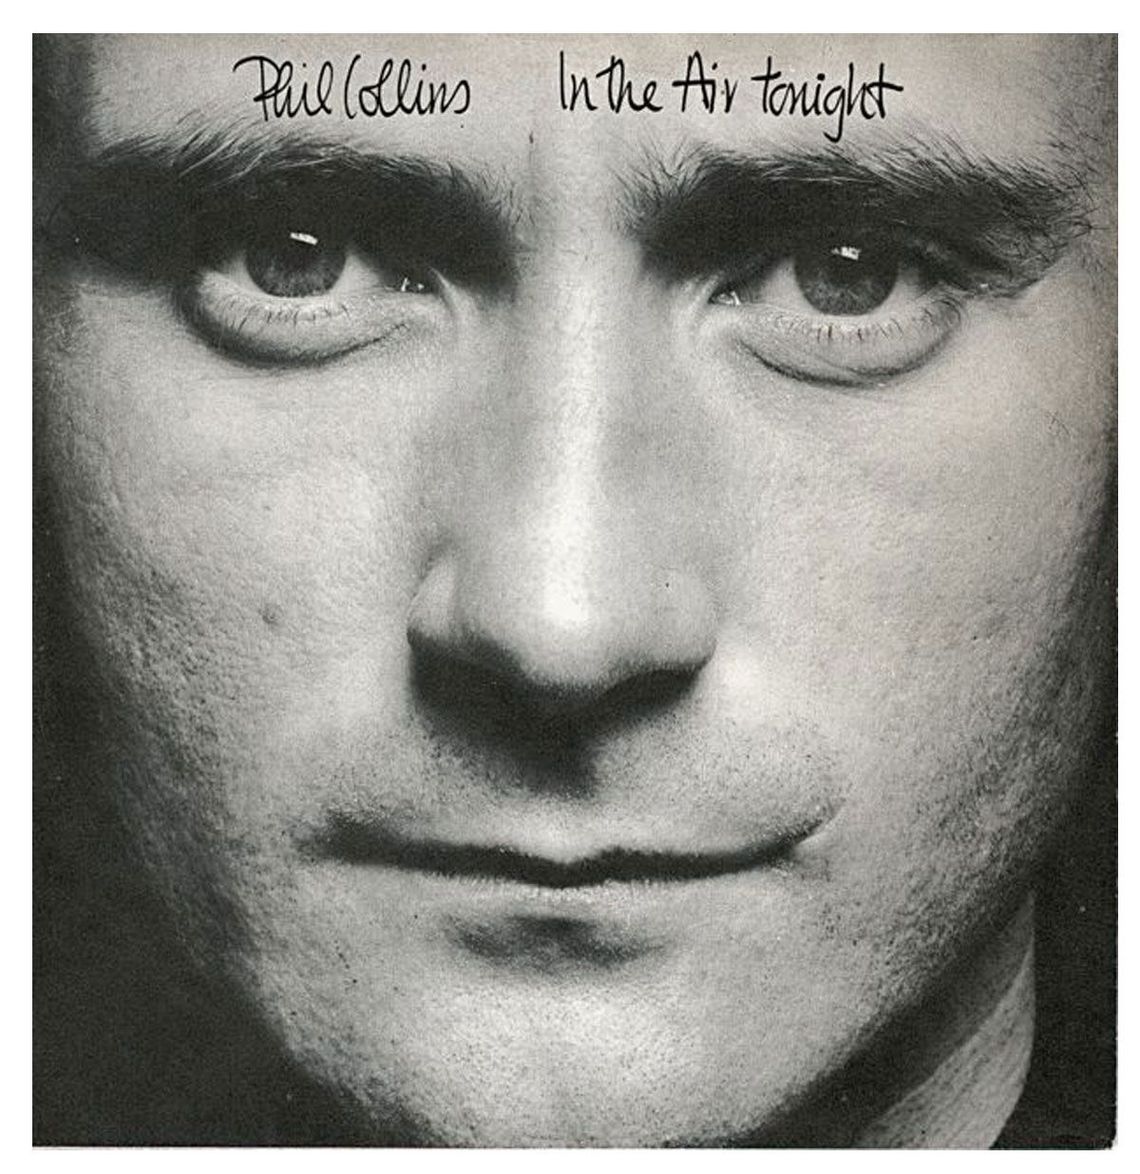 Phil Collins "In the air tonight"